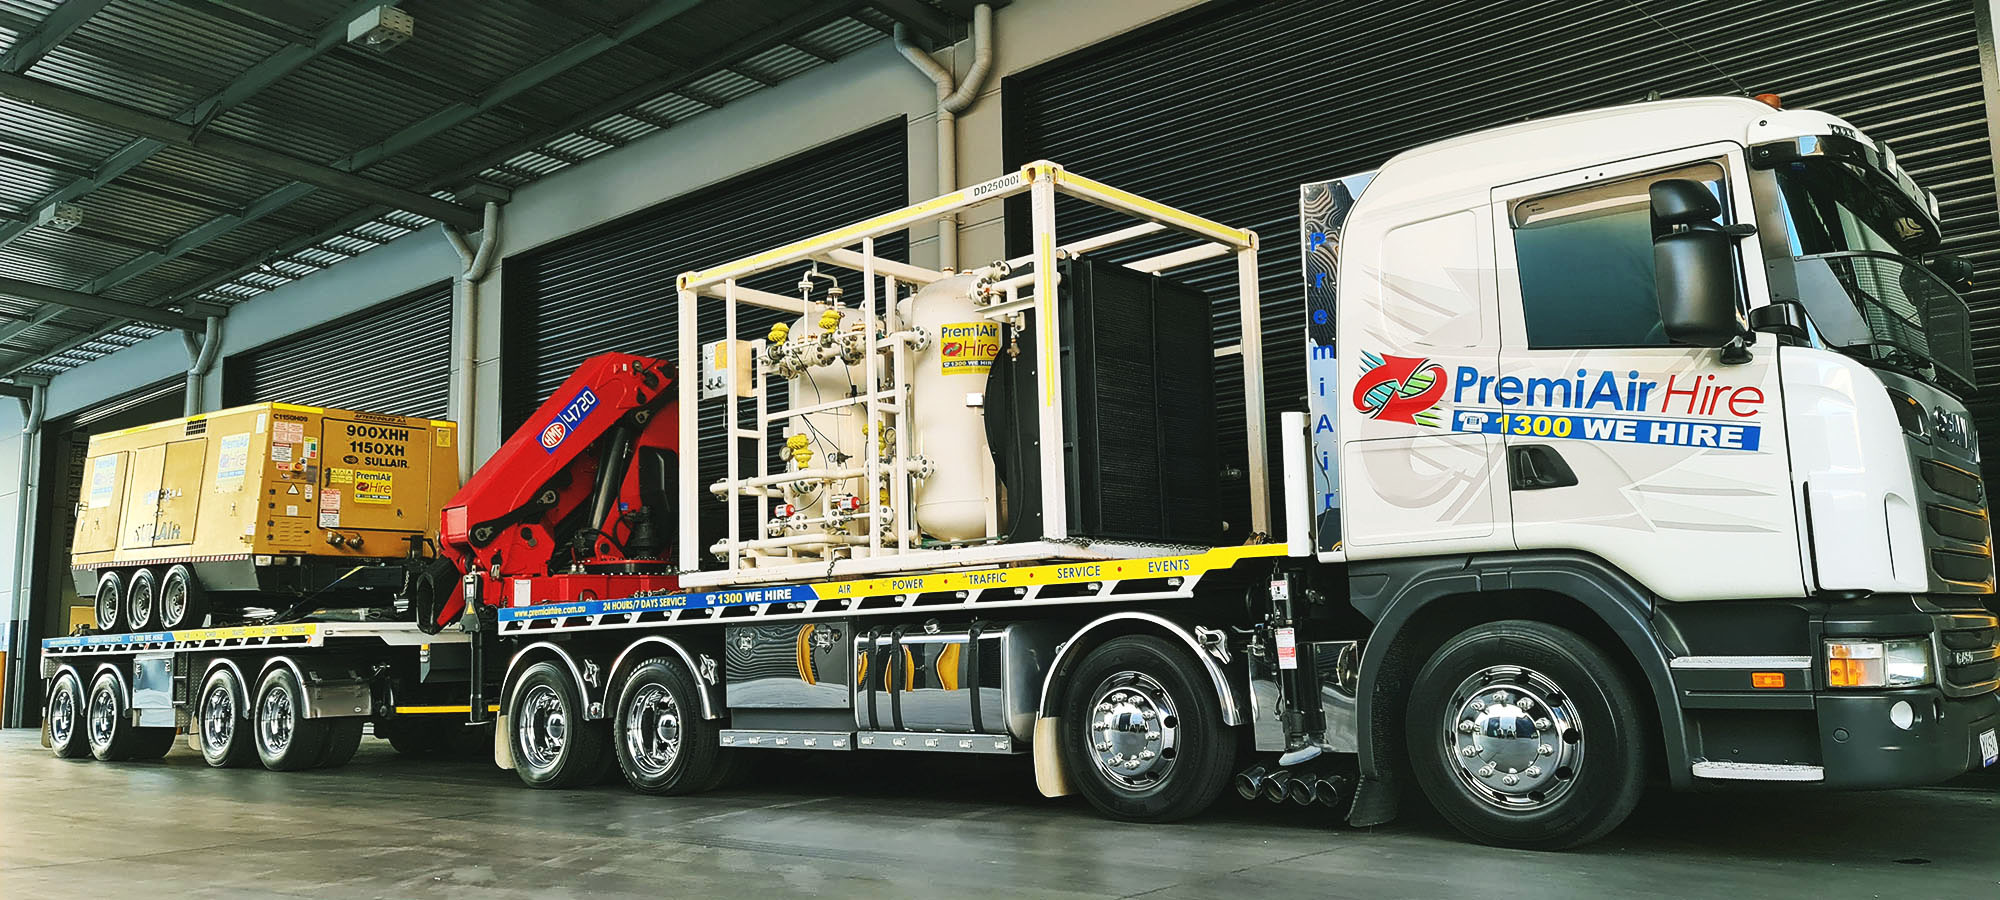 A PremiAir Hire truck loaded up for deliveries.